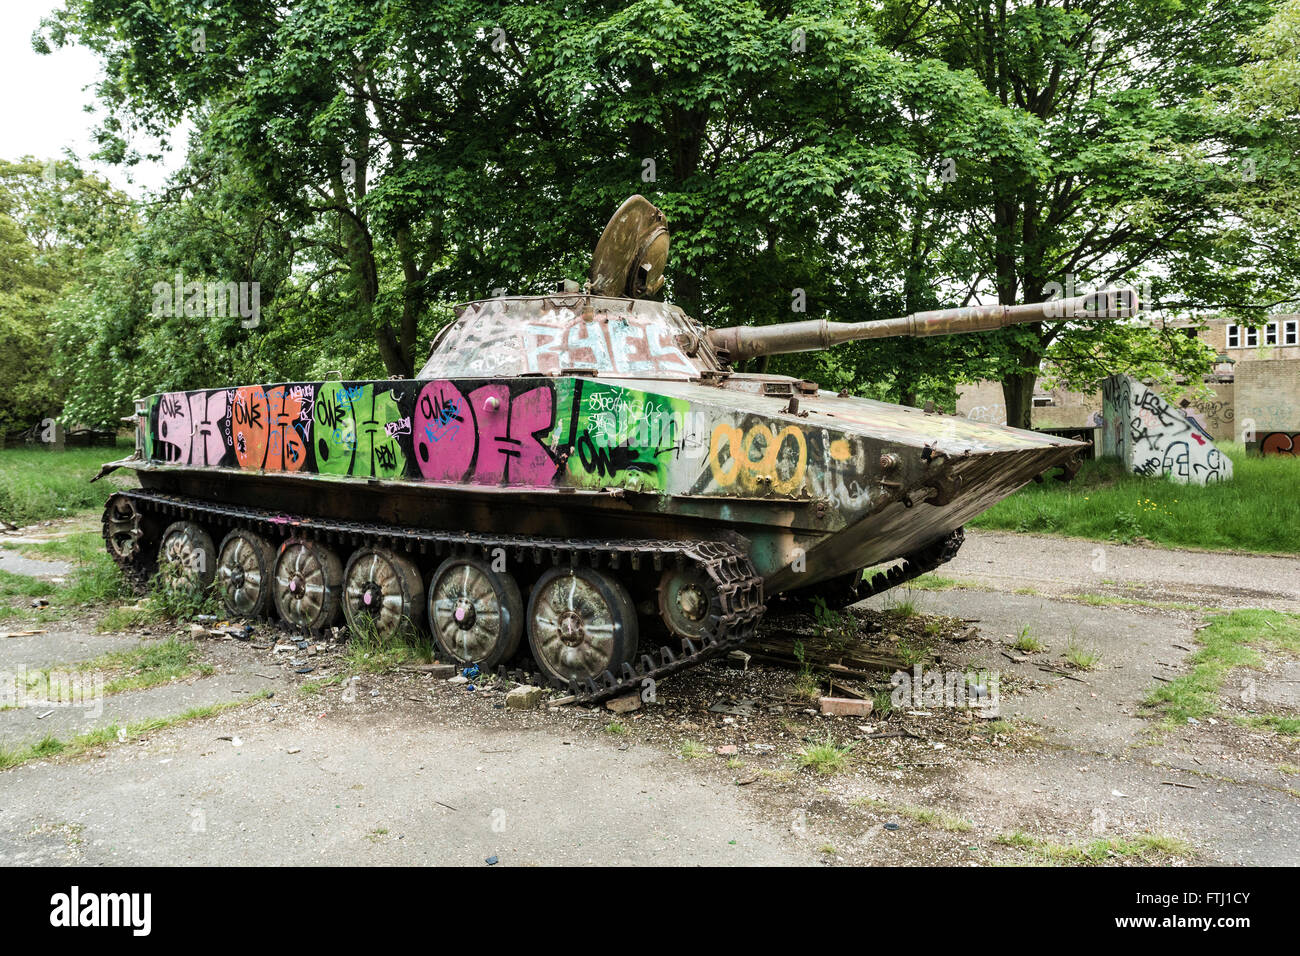 military tank with graffiti painted on at the old derelict RAF Upwood airbase in Cambridgeshire, UK Stock Photo